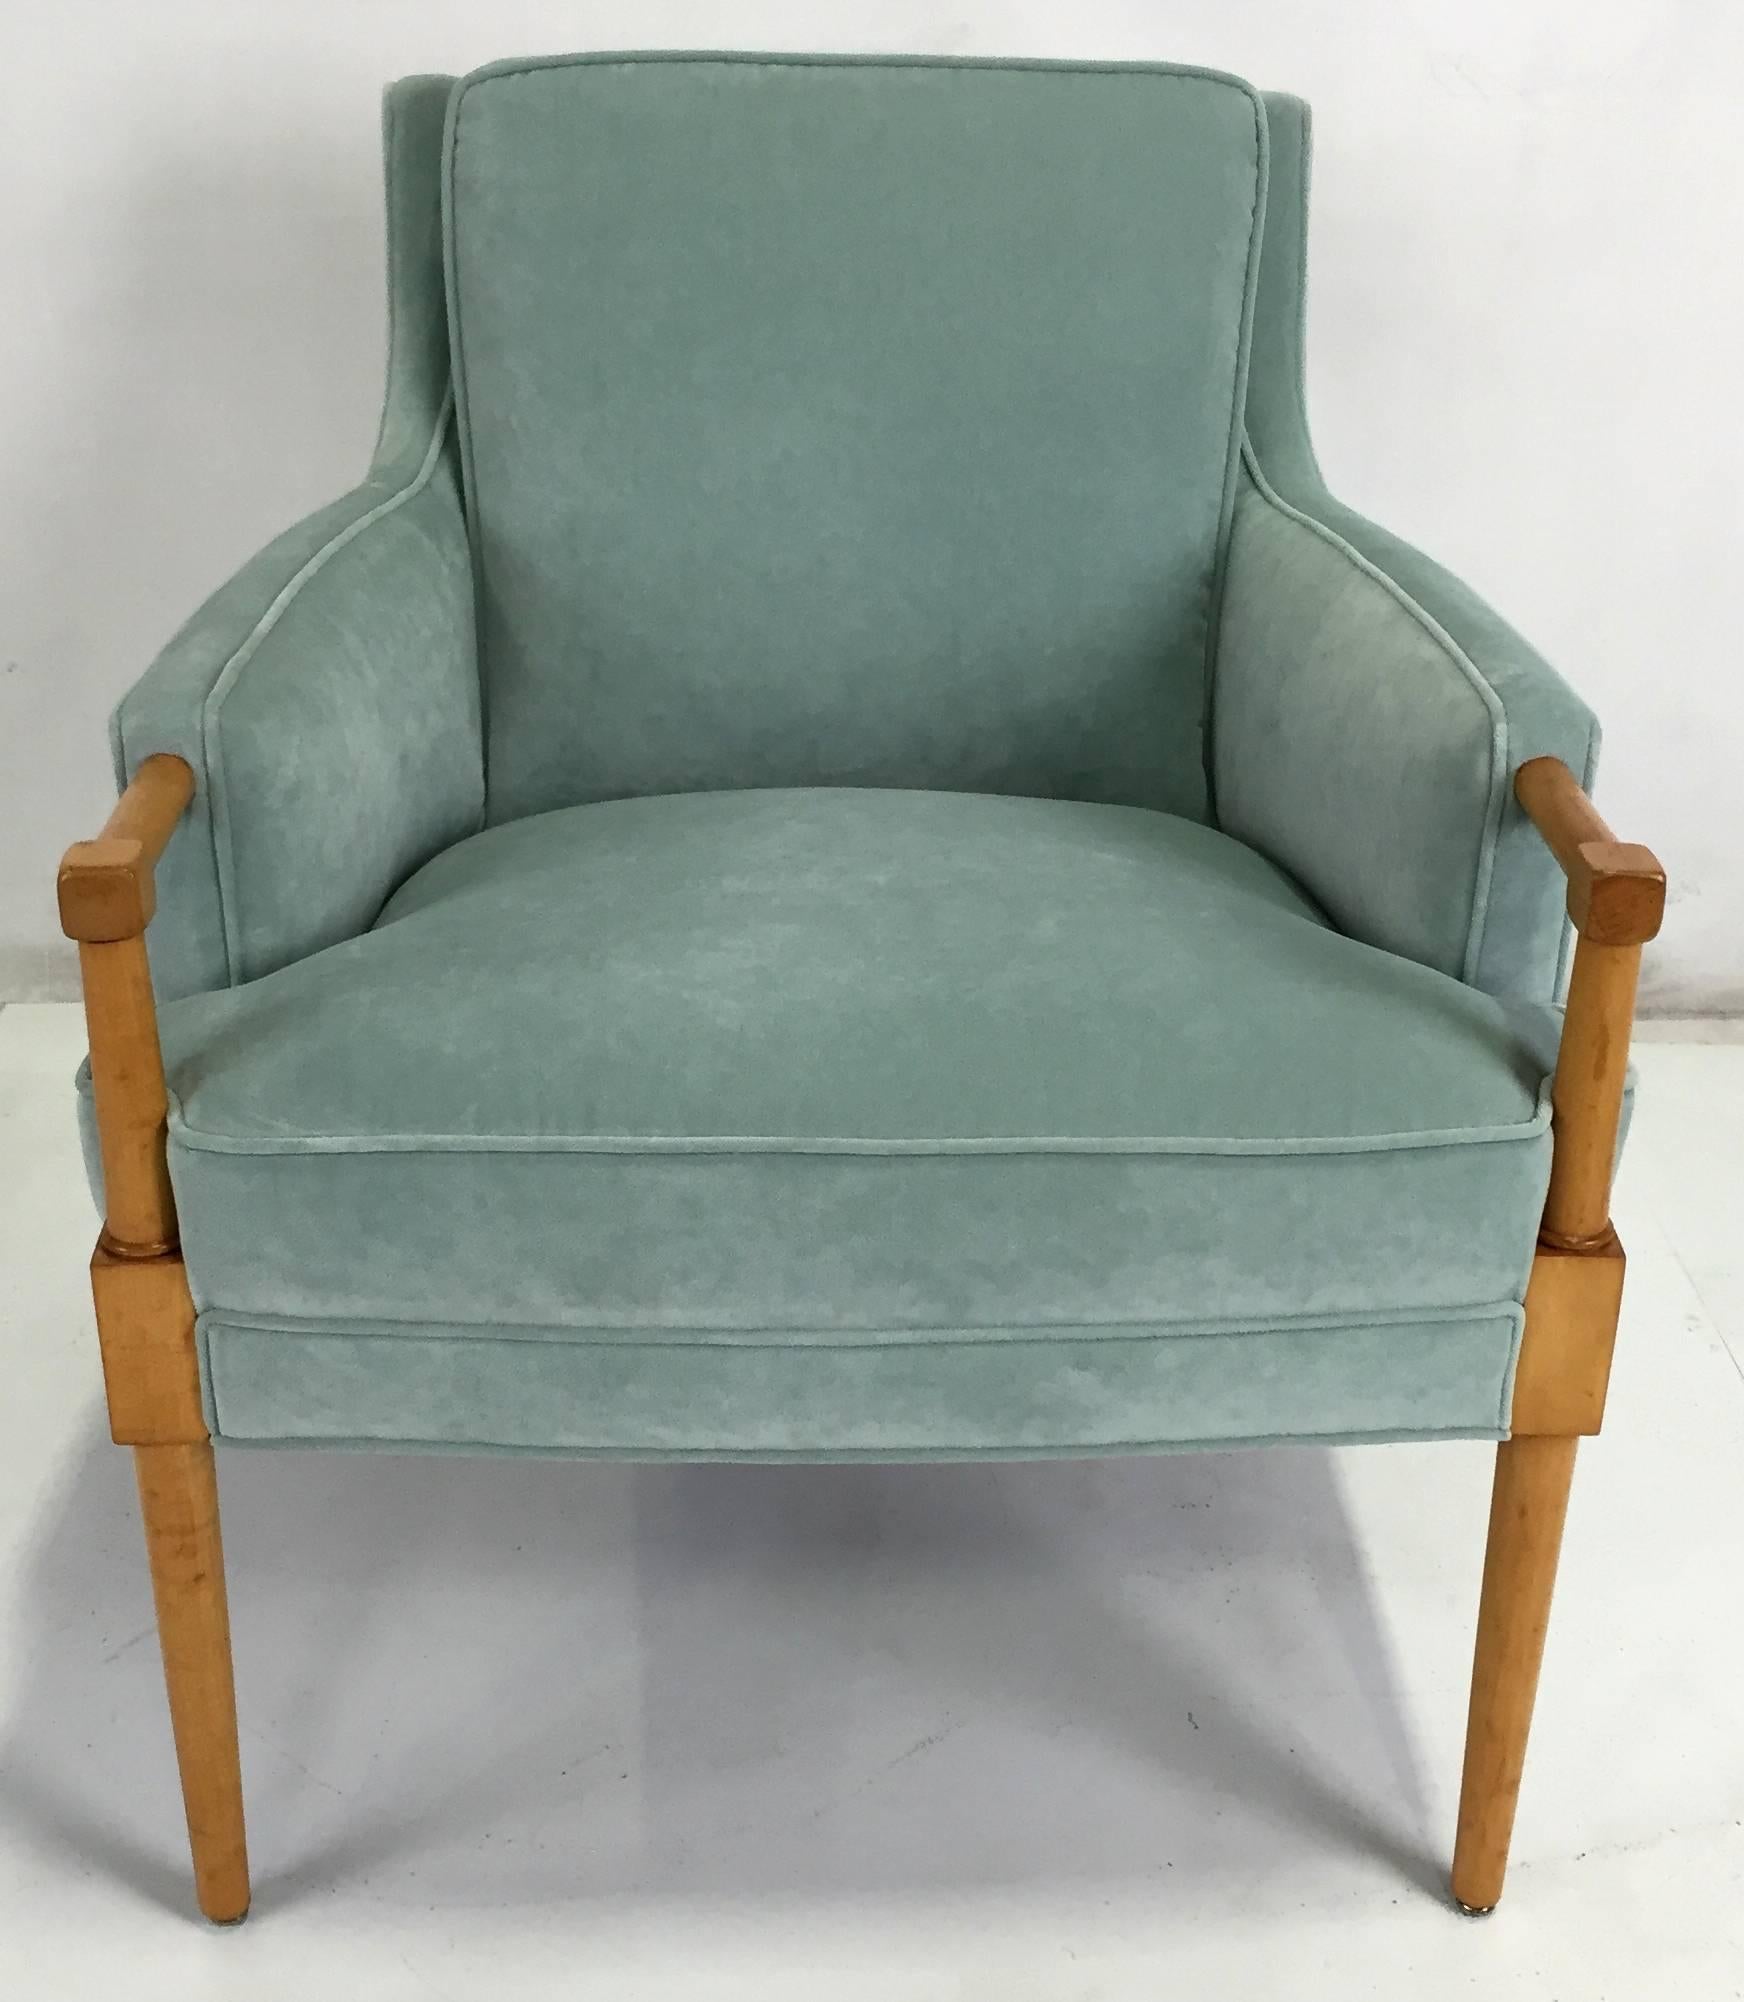 Luxe pair of lounge chairs with exposed hardwood arms and knee brackets. The pair have been meticulously restored and reupholstered in luxurious heavy weight Designer Light Teal velvet. 
Dimensions
26 x 30 x 30h
Seat height- 17"